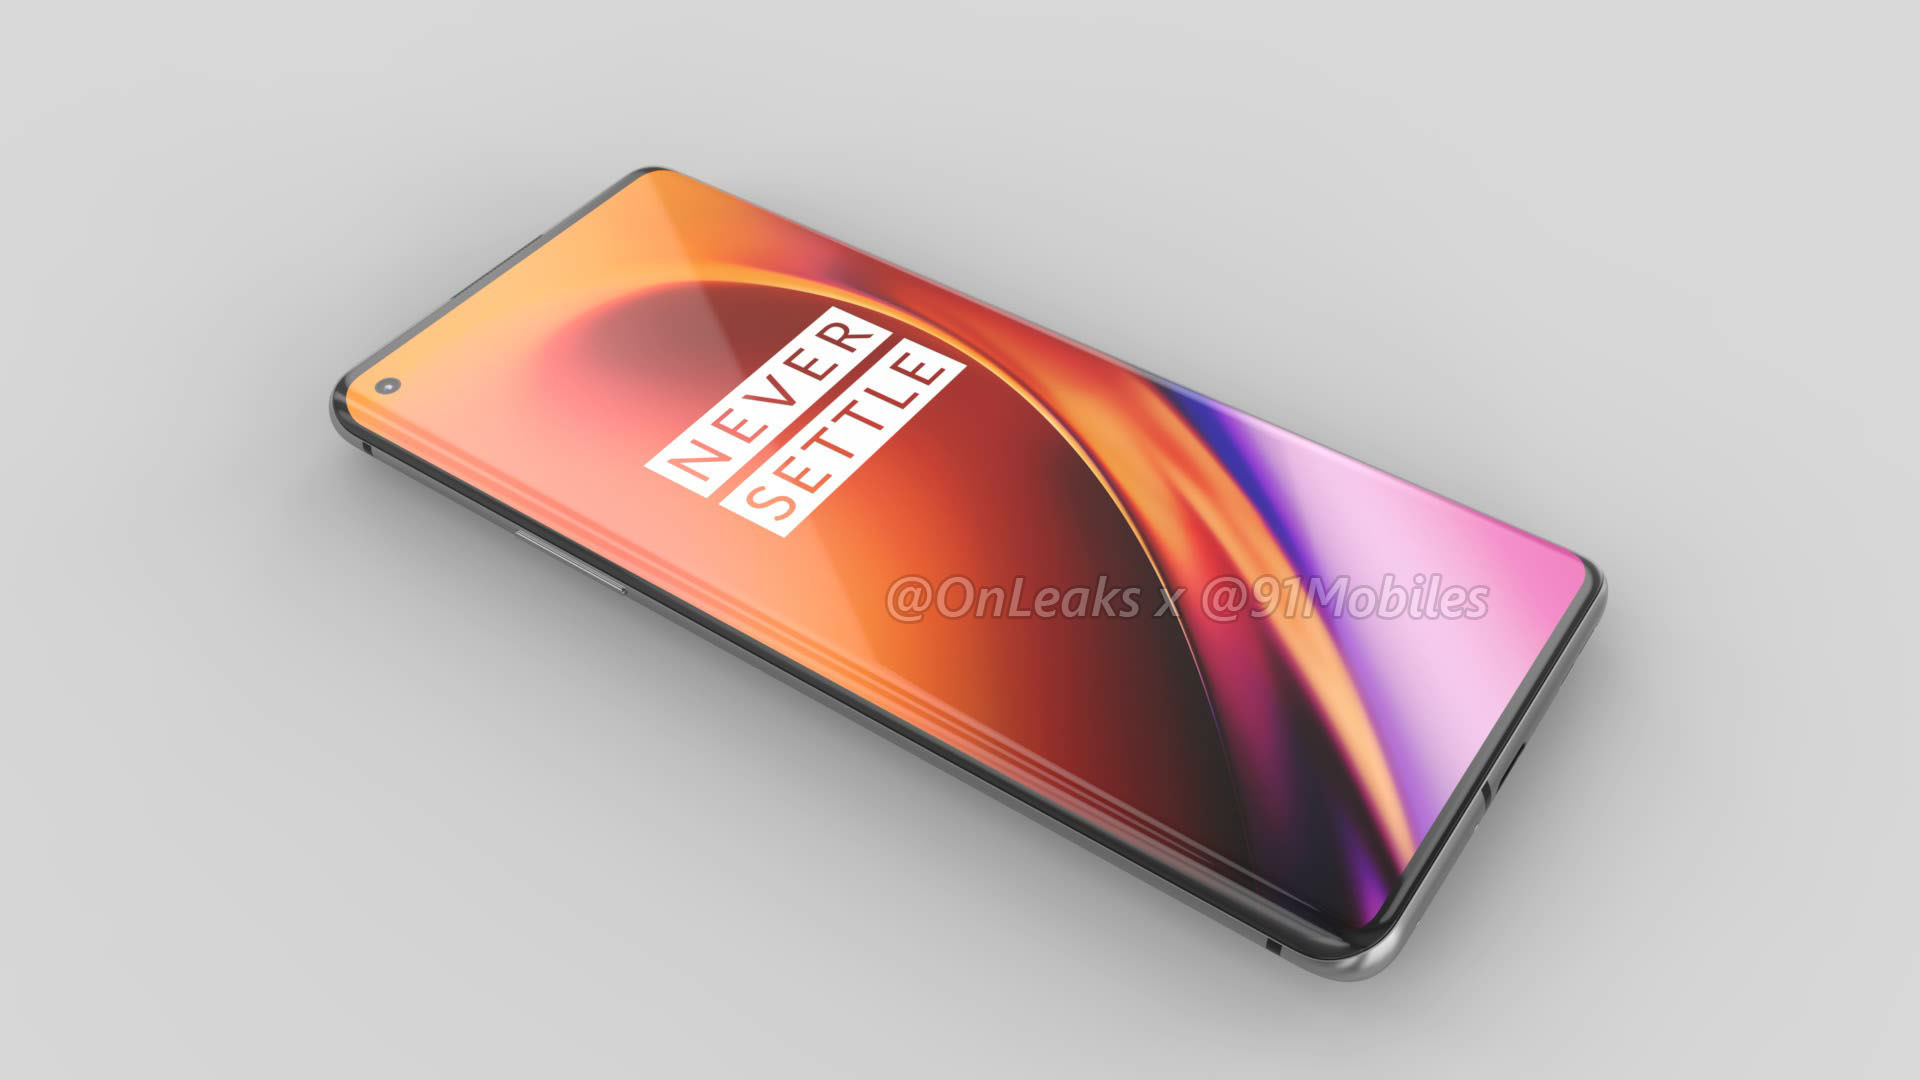 The OnePlus 8 series will offer Warp Charge 30 Wireless charging.